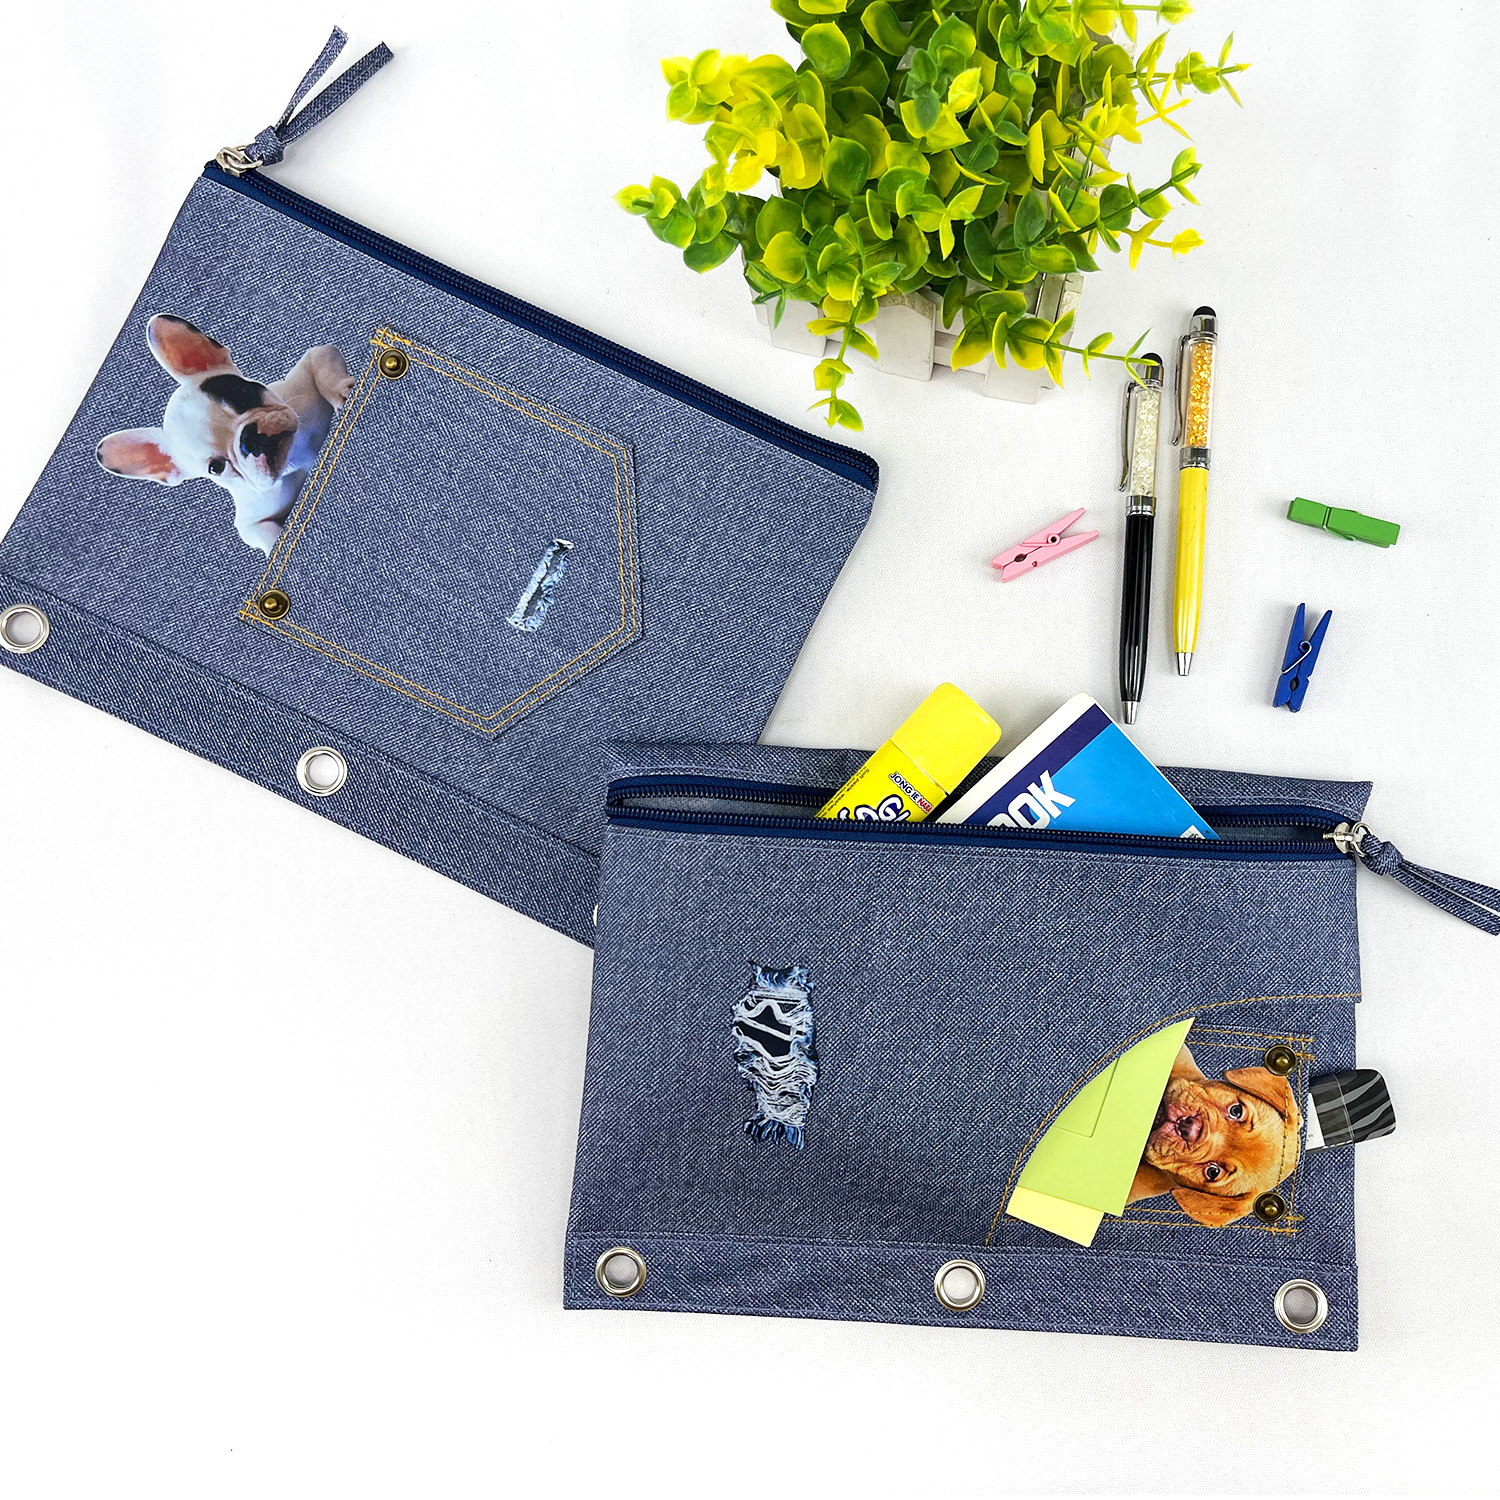 Doggy denim pocket binder pouch pencil bag with double pocket with zipper closure with 3-round rings 3 colors available great gift for kids teens adults for school office daily use